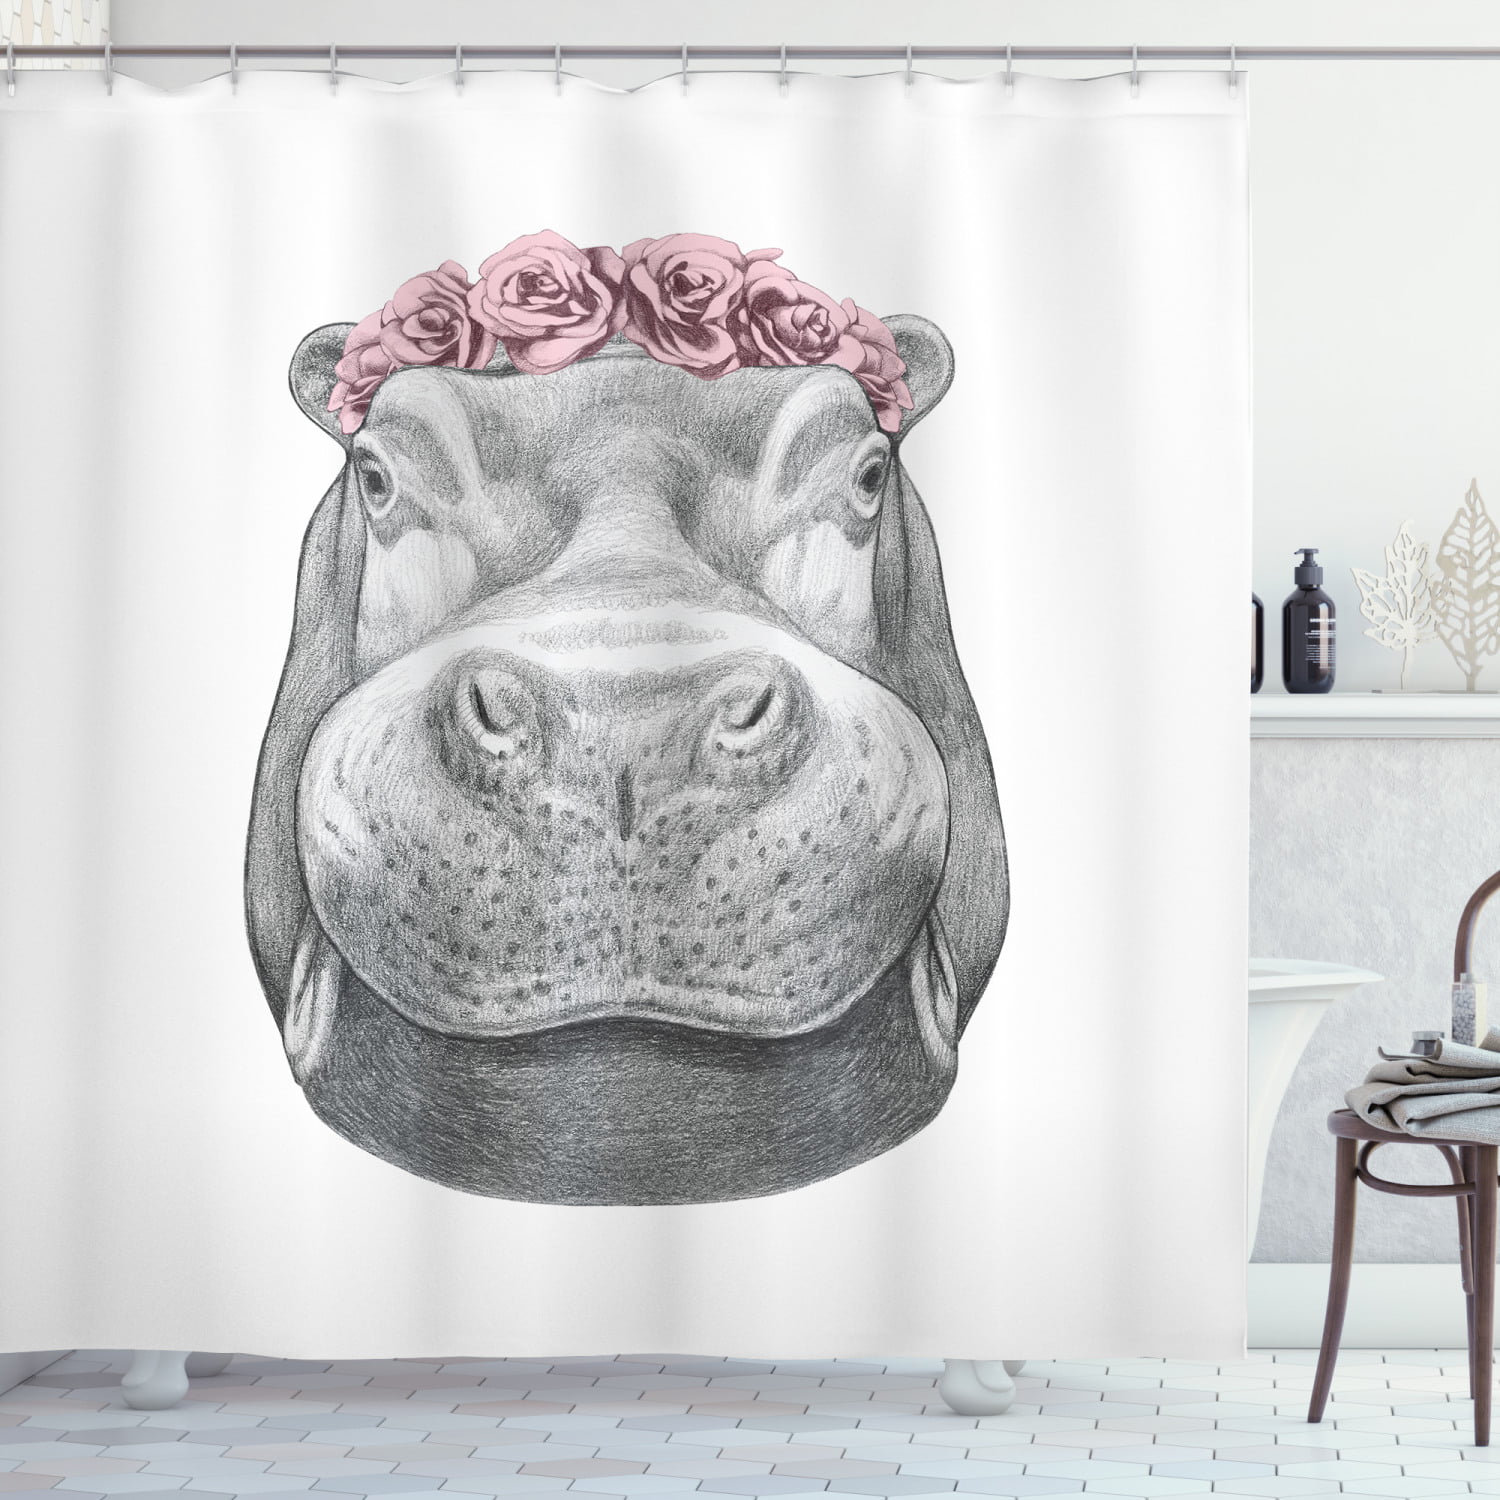 Water Resistant Fabric Hippo Shower Curtain Bathroom Liner Panel Decor 